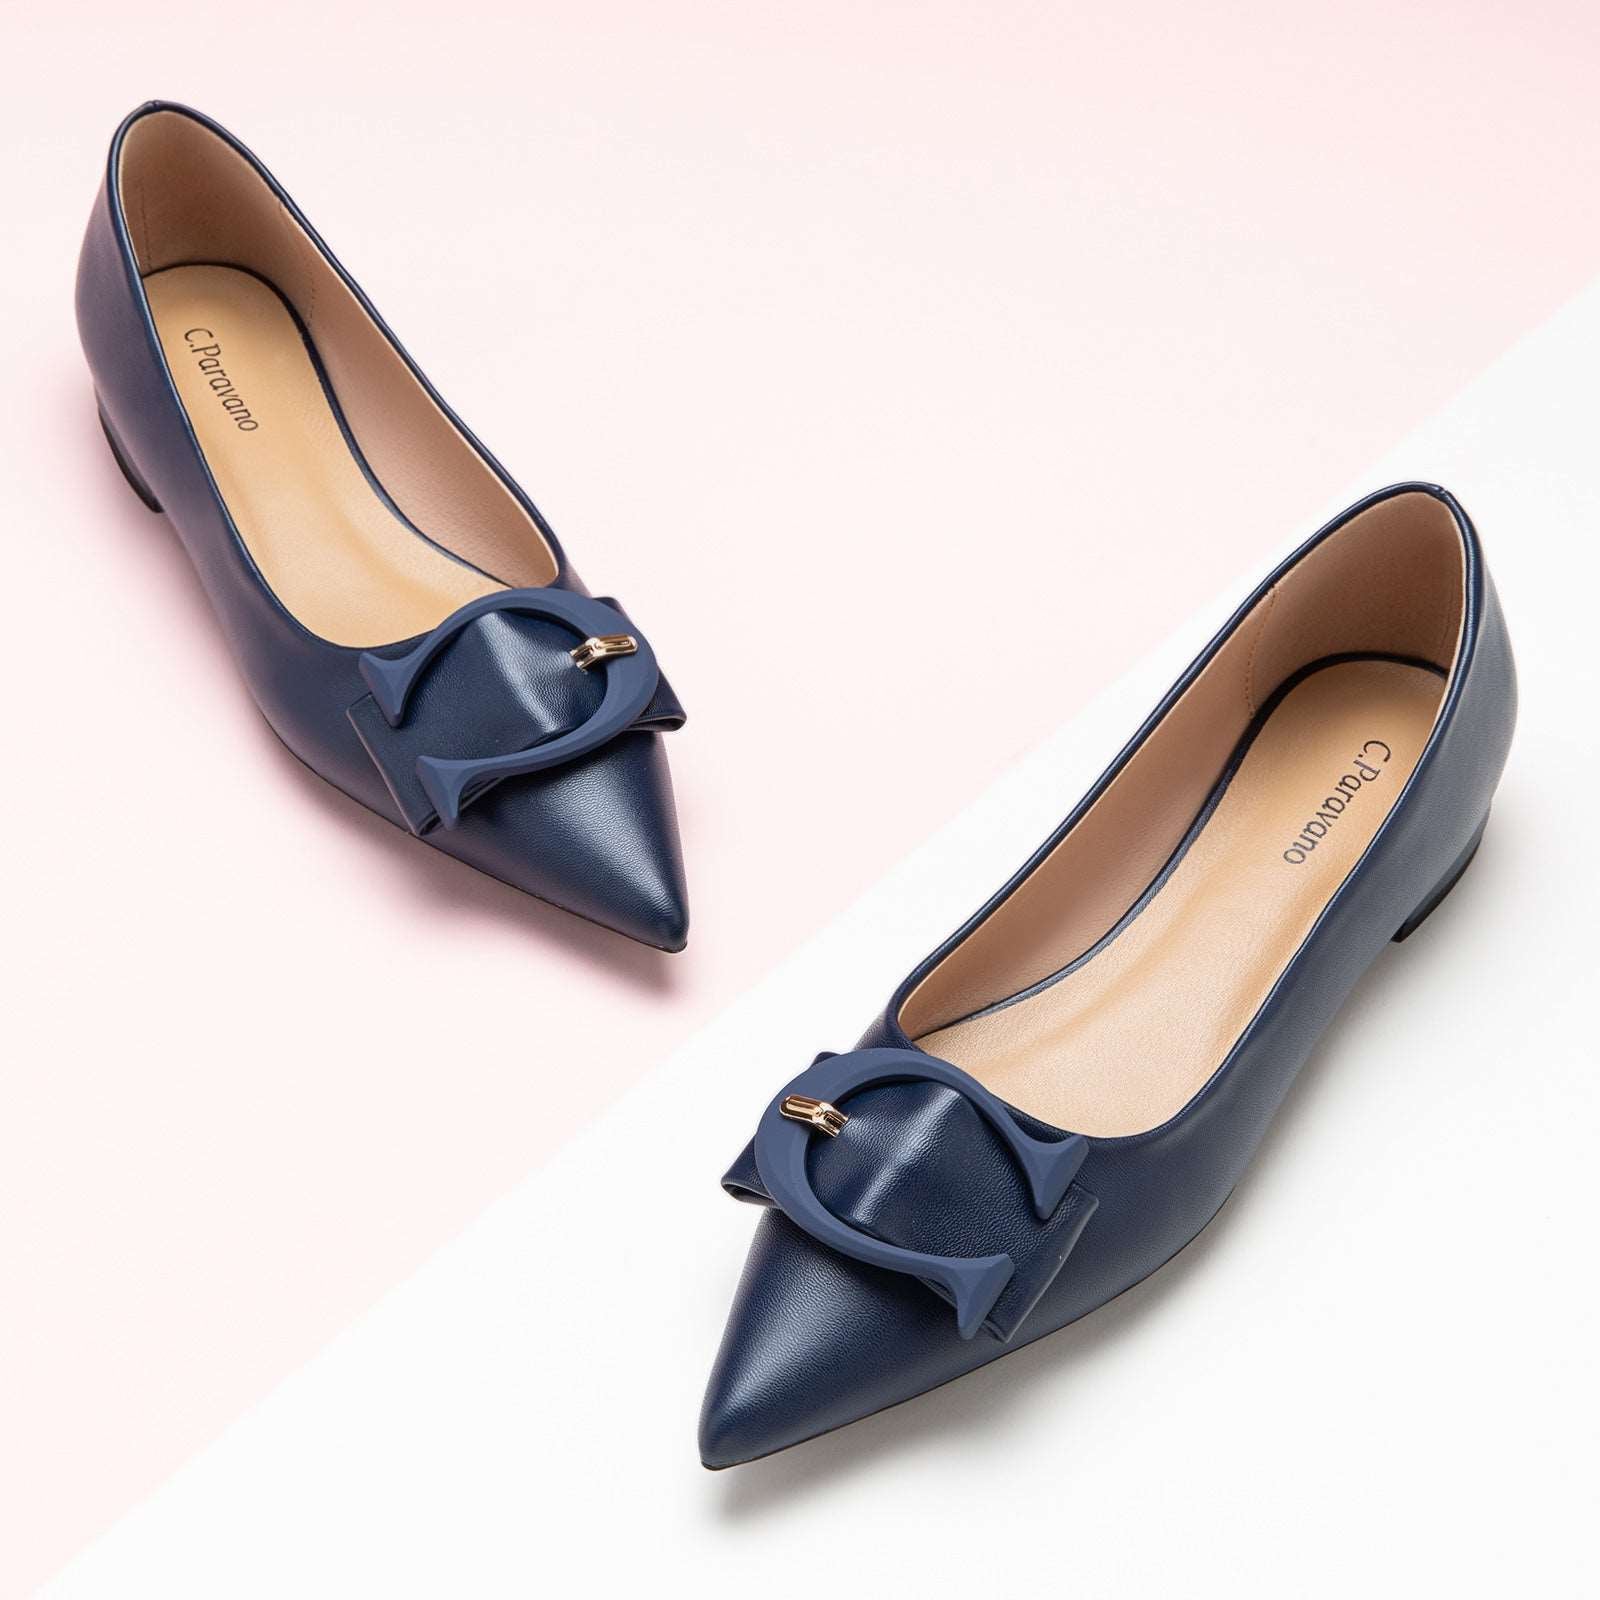 Classic navy pointed toe flats with a chic C buckle detail – a timeless and versatile choice for any wardrobe.